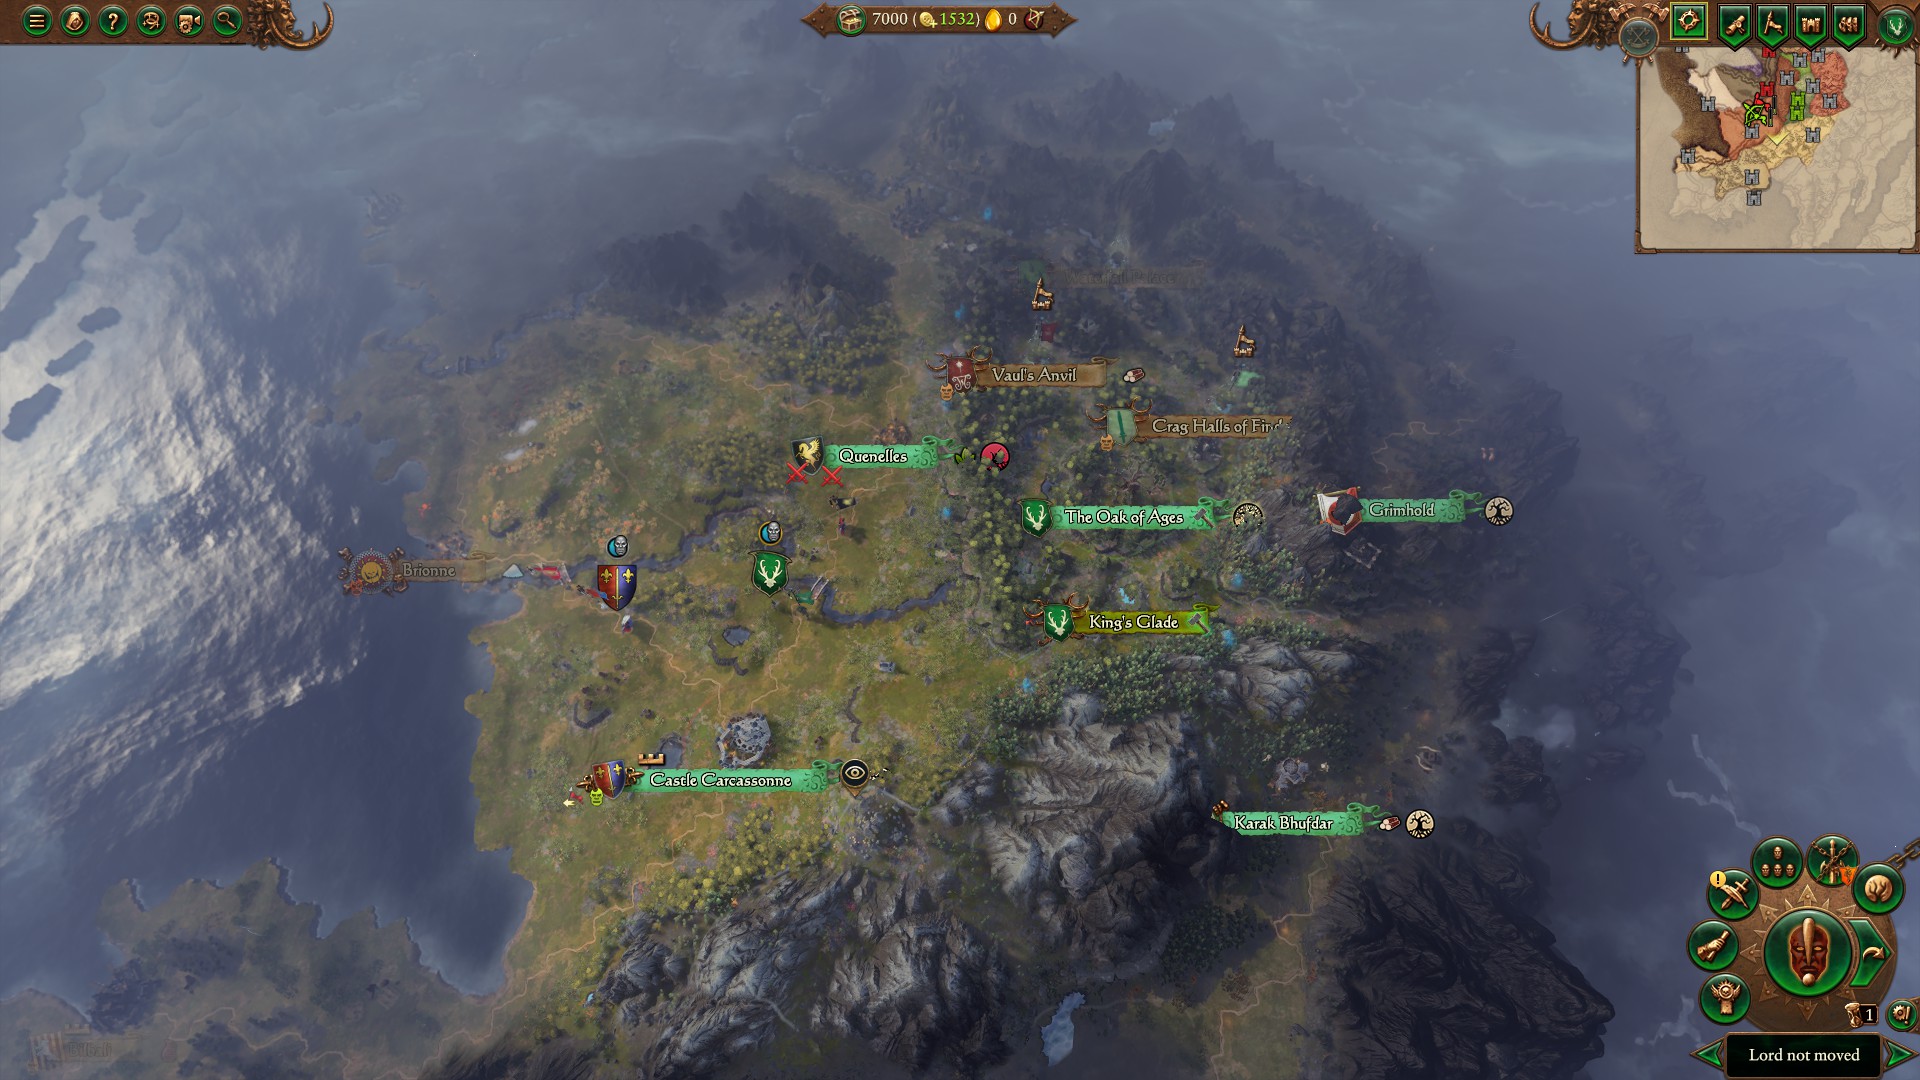 Warhammer 3 Immortal Empires Orion - Wood Elves campaign overview, guide and second thoughts image 1